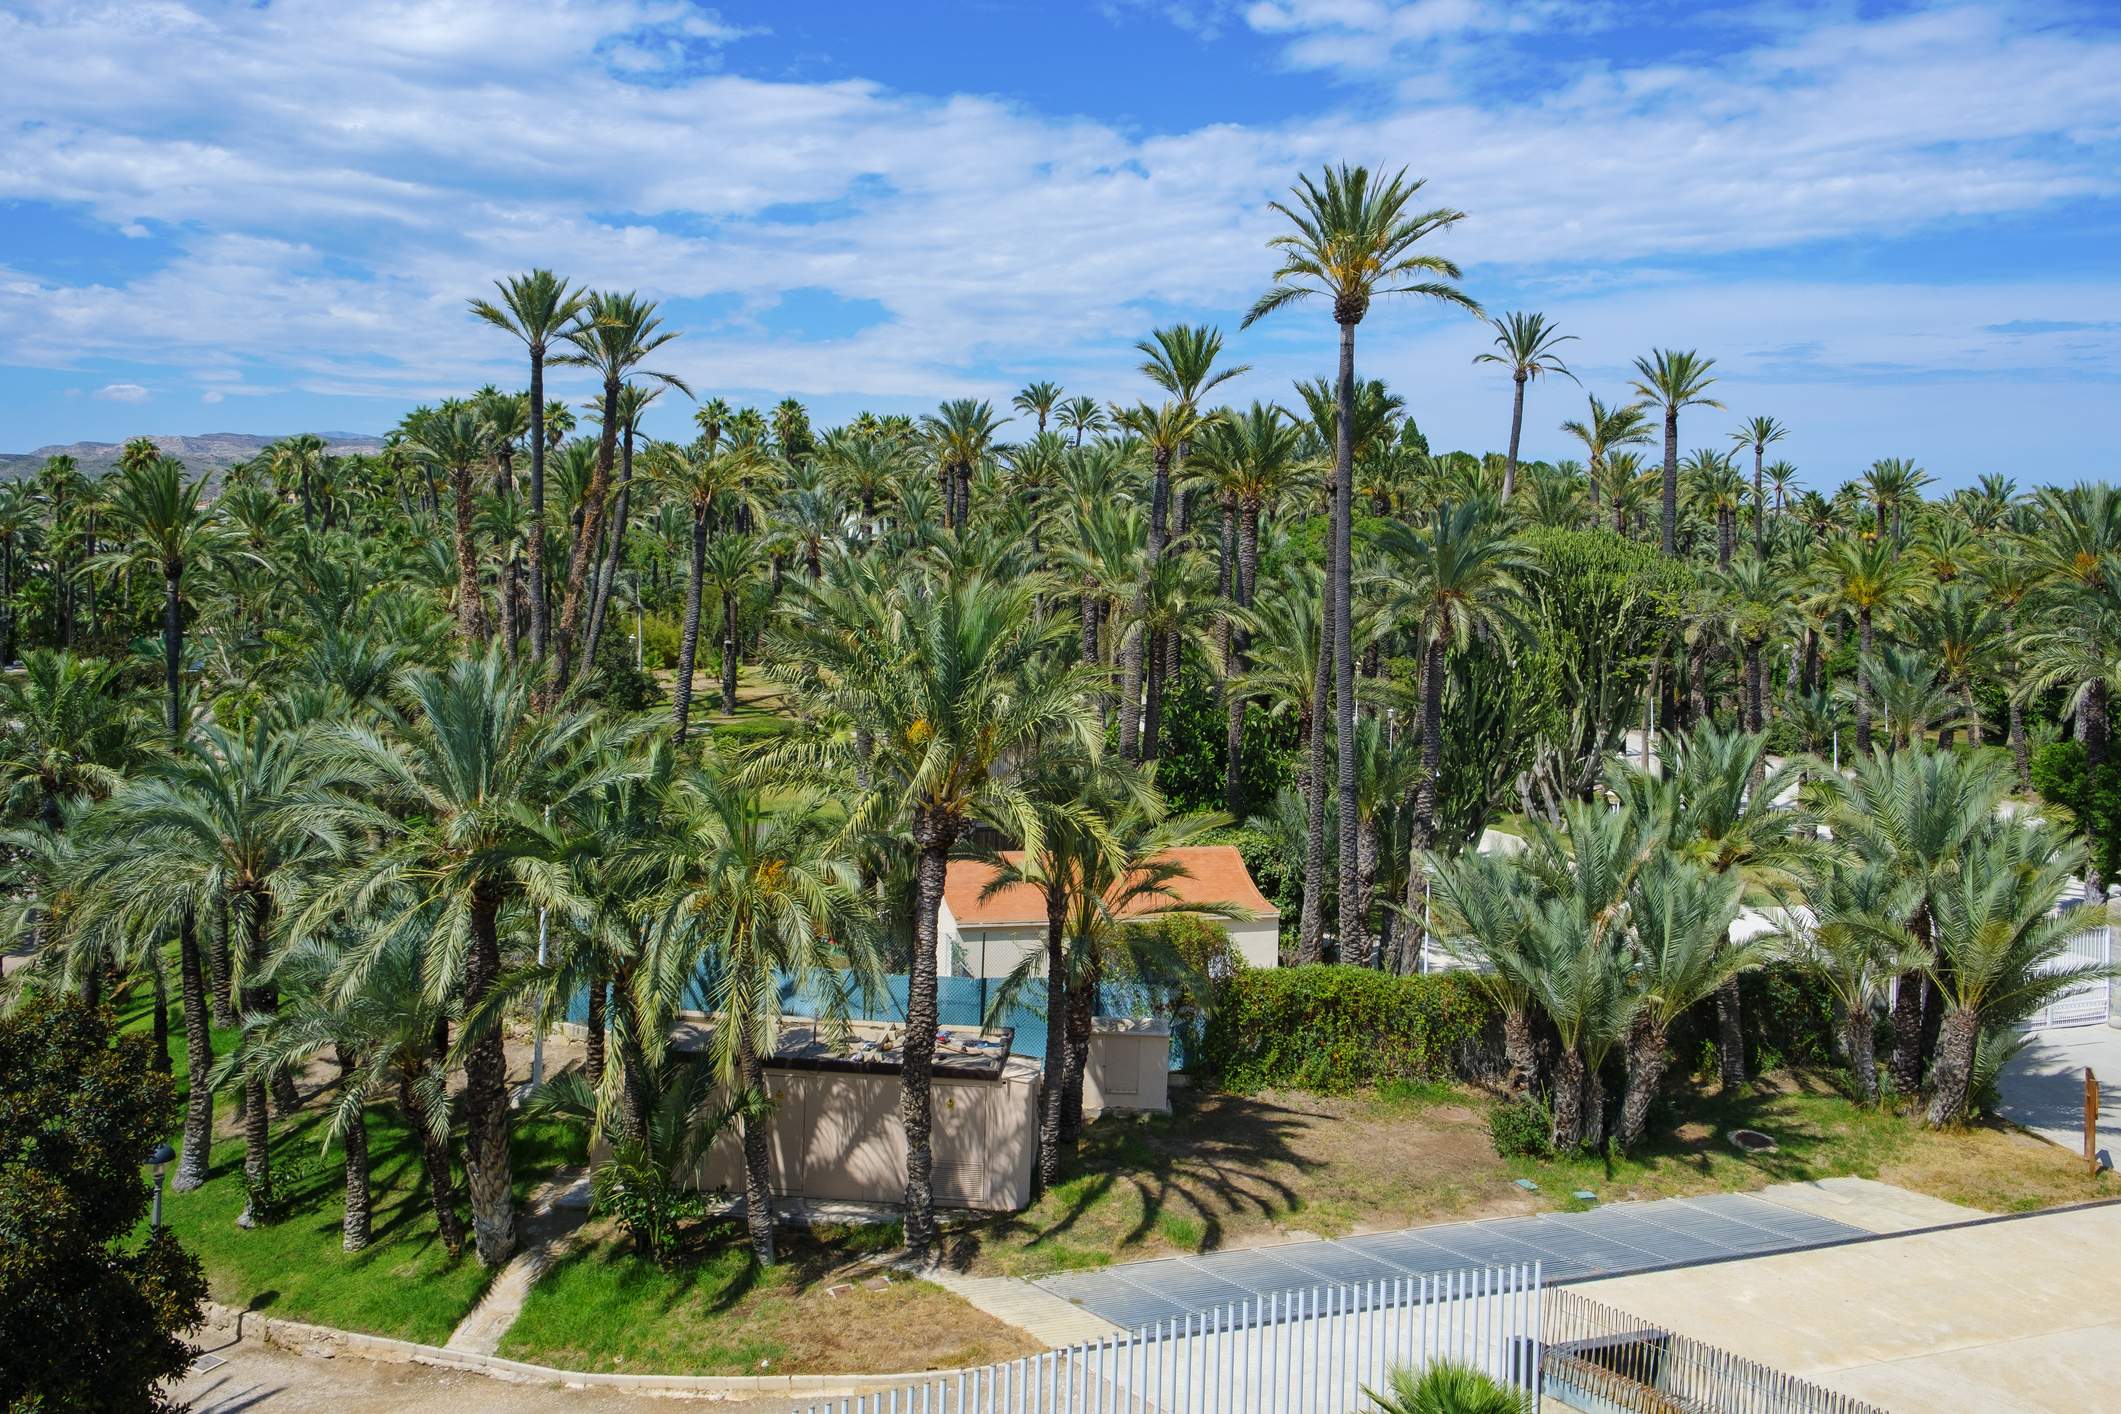 a view over the famous Palmeral de Elche, or Palm Grove of Elche, a public park with many palm trees in Elche, in the Valencian Community, Spain